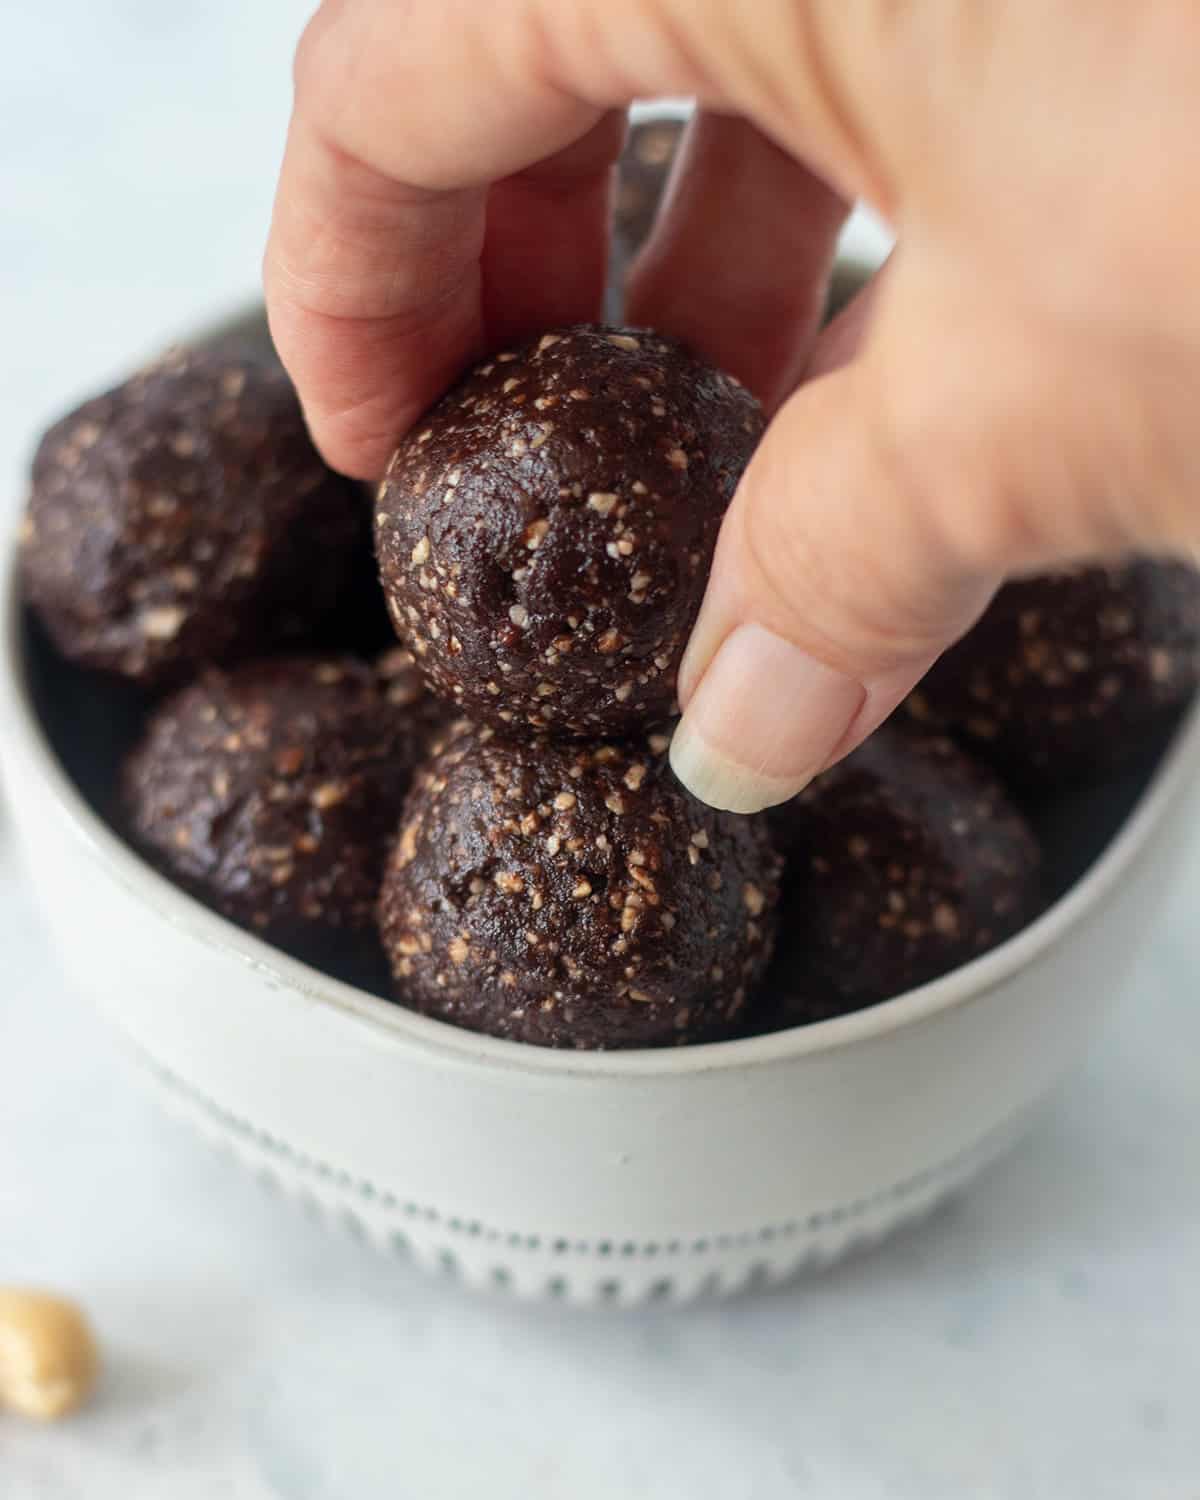 chocolate protein balls in a white bowl with blue trim and a hand reaching in to pick one up. A cashew it beside the bowl.